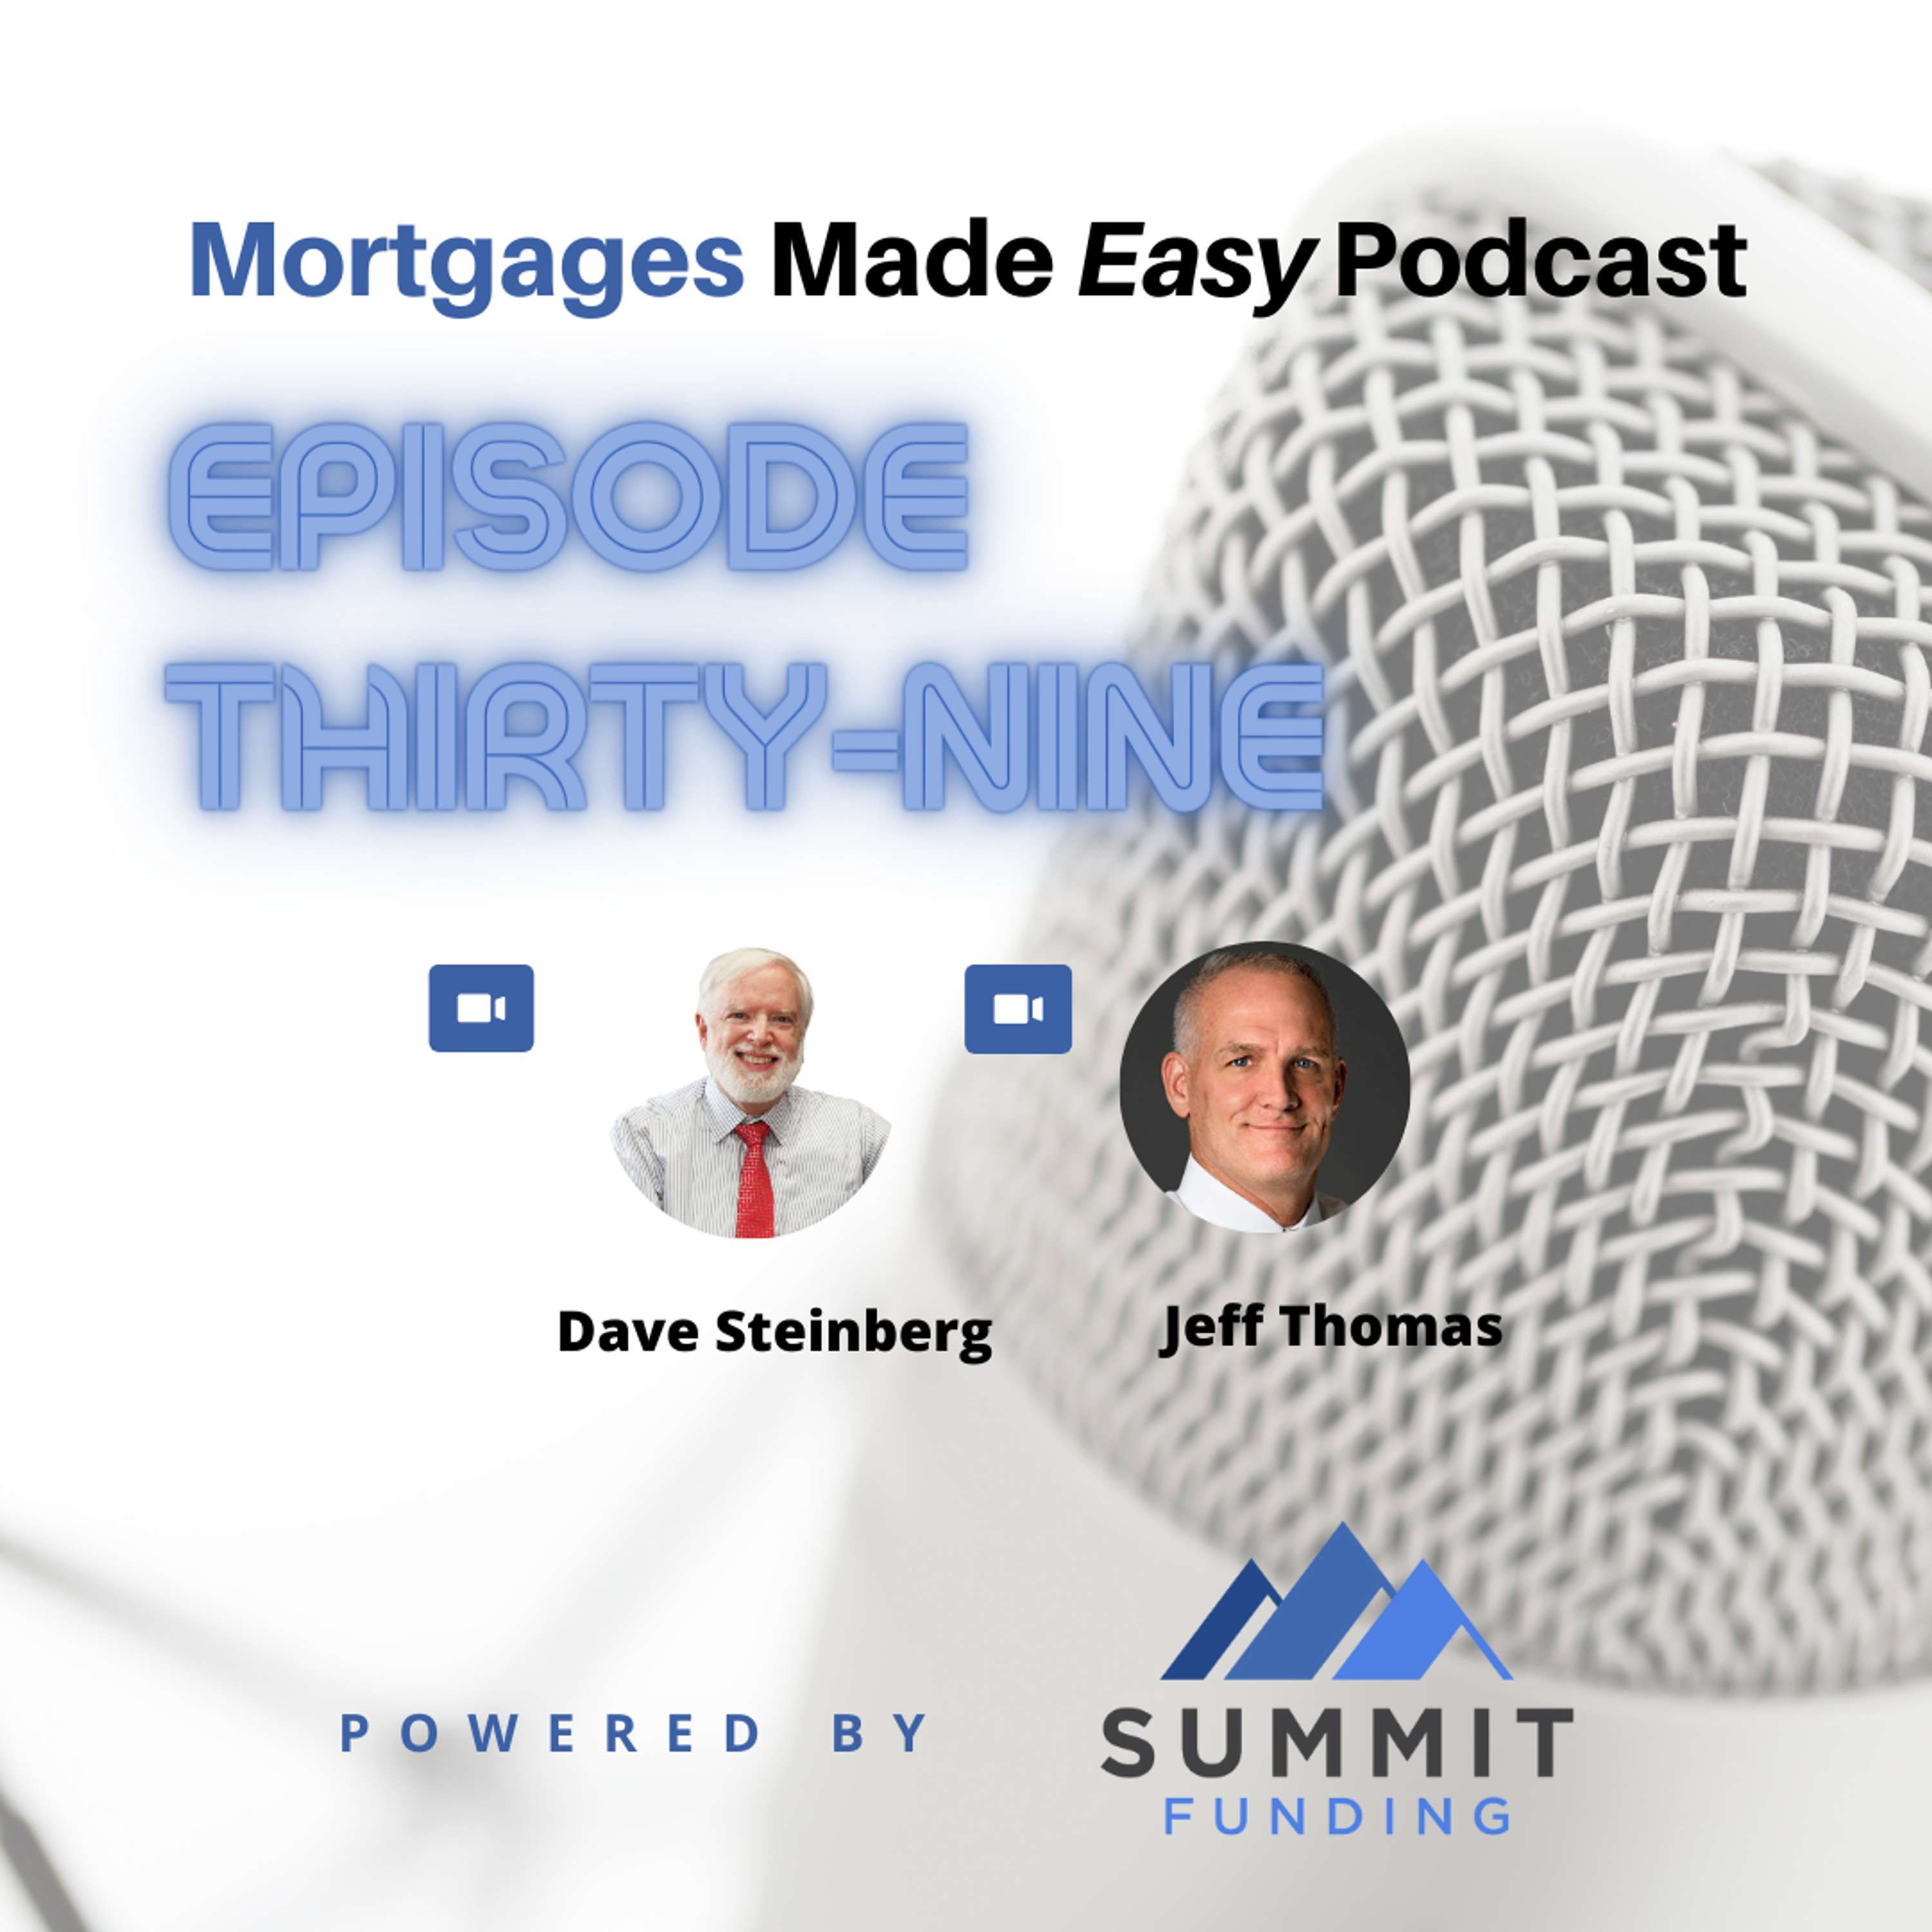 Episode 39: Exploring Cash Offer with Jeff Thomas (Part 1)